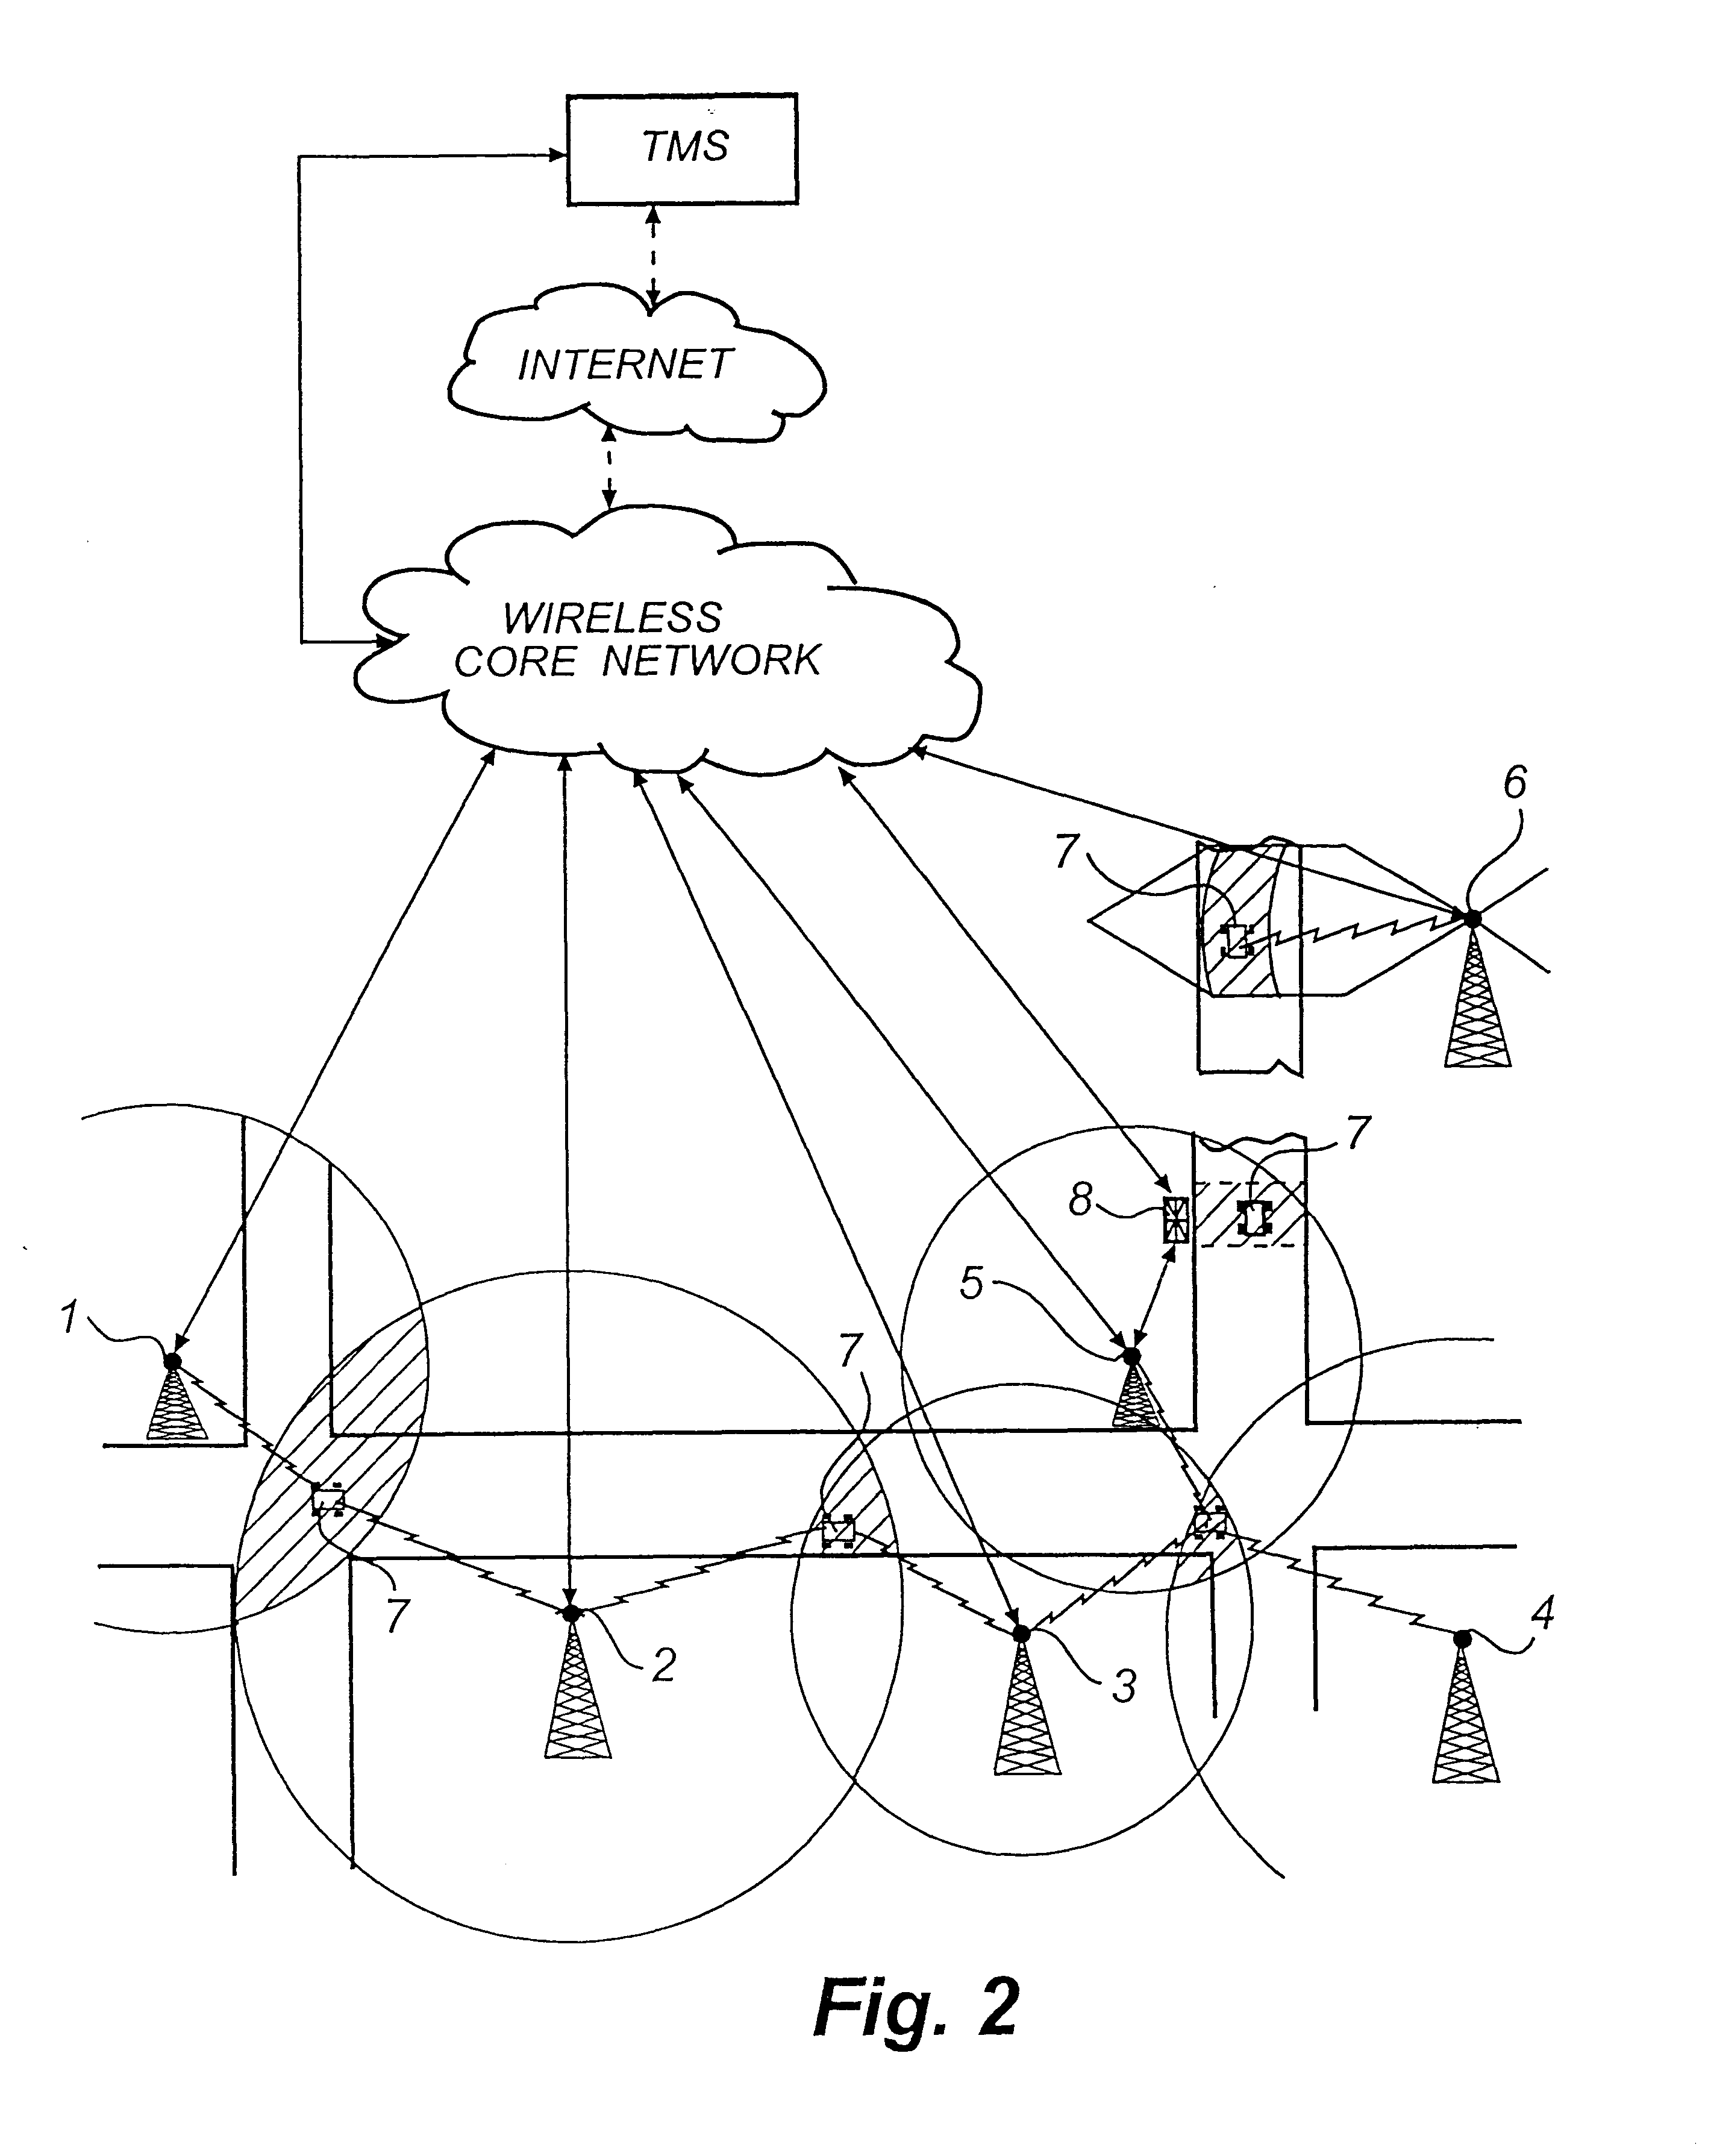 Traffic monitoring system and method